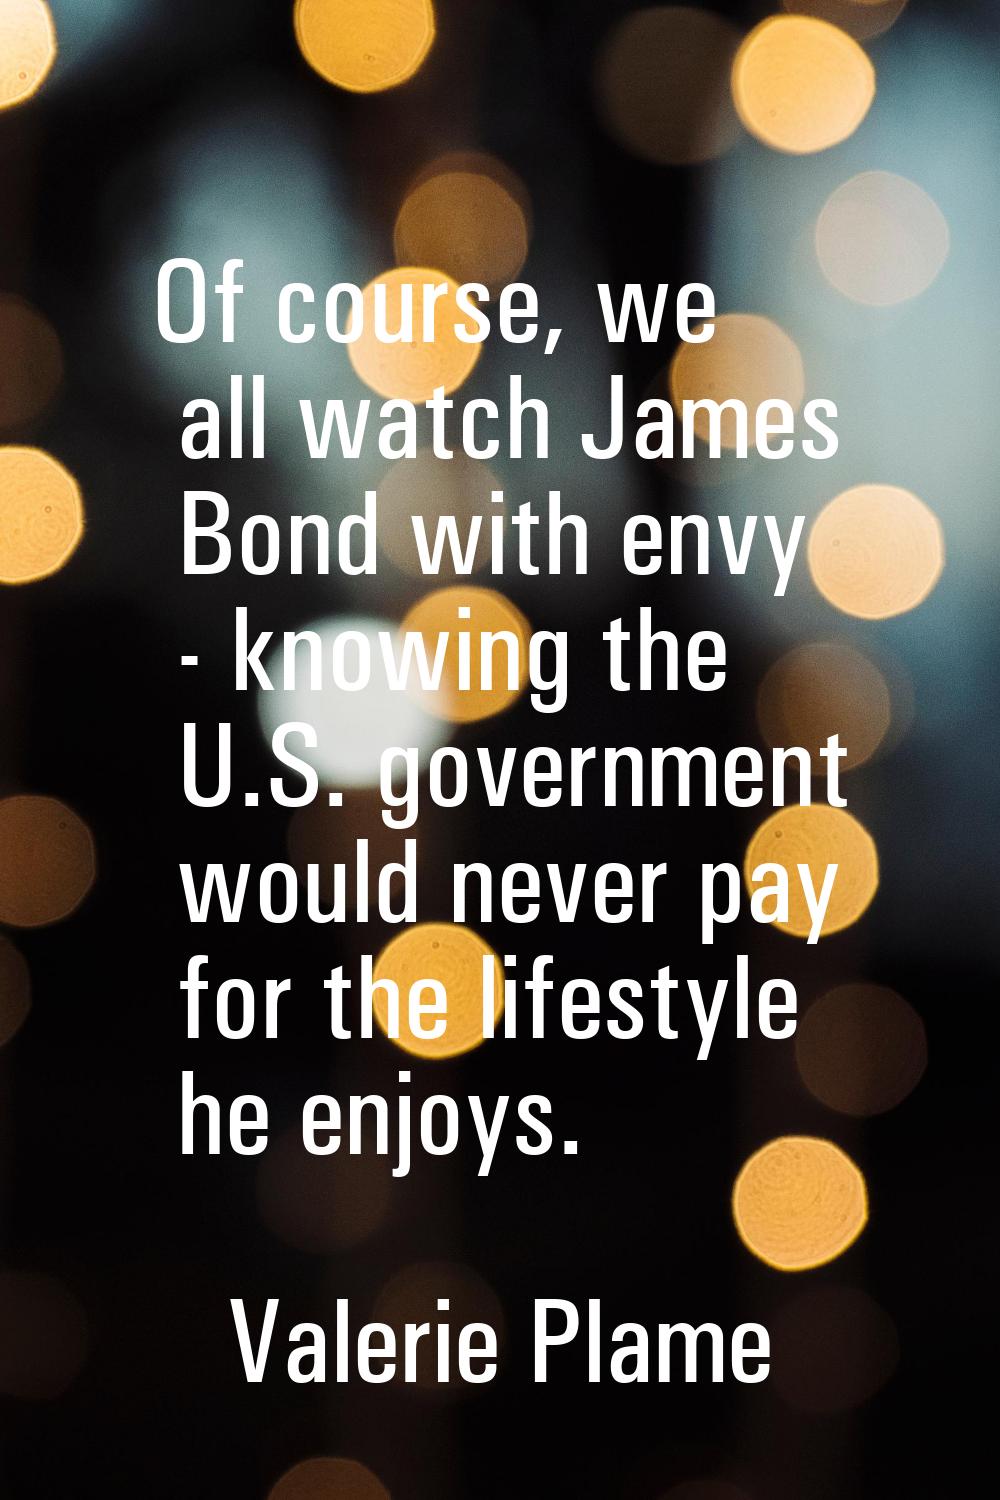 Of course, we all watch James Bond with envy - knowing the U.S. government would never pay for the 